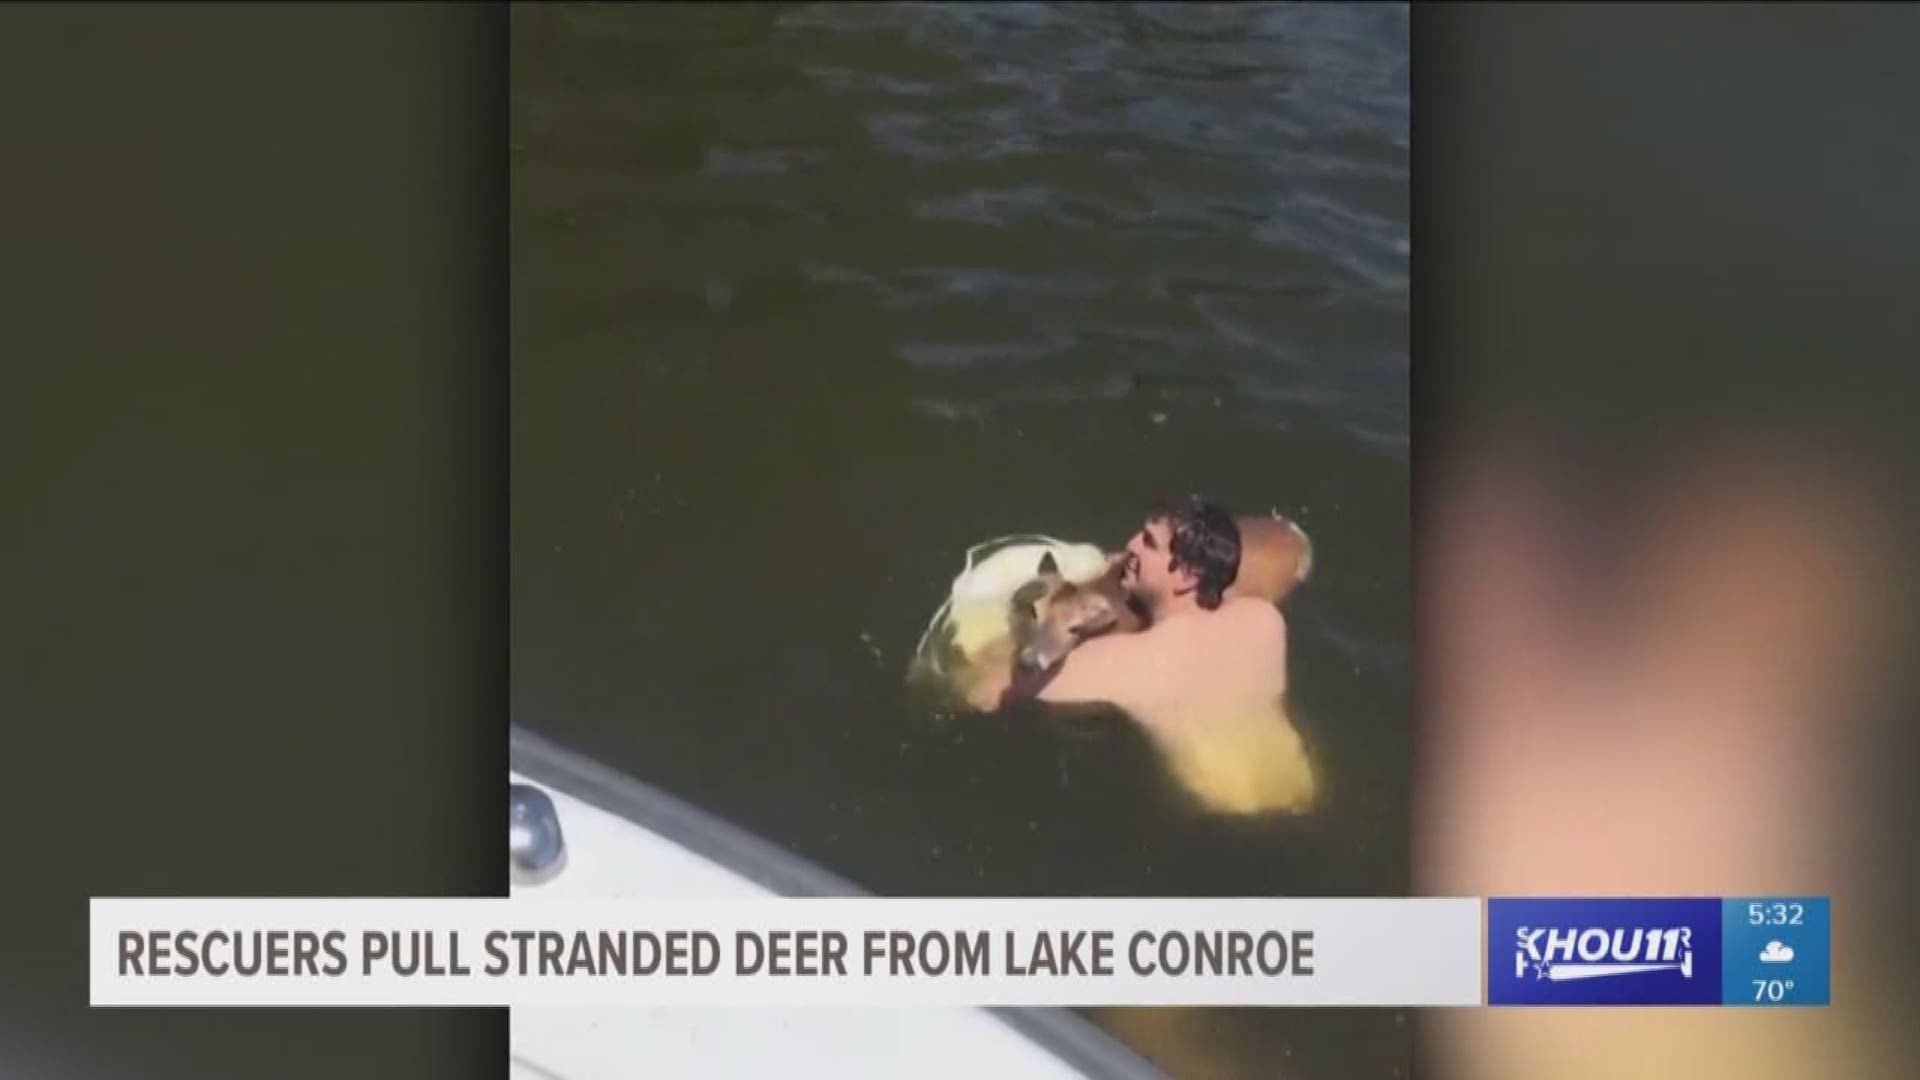 A video viewed on Facebook thousands of times showed a buck being rescued from Lake Conroe Sunday.